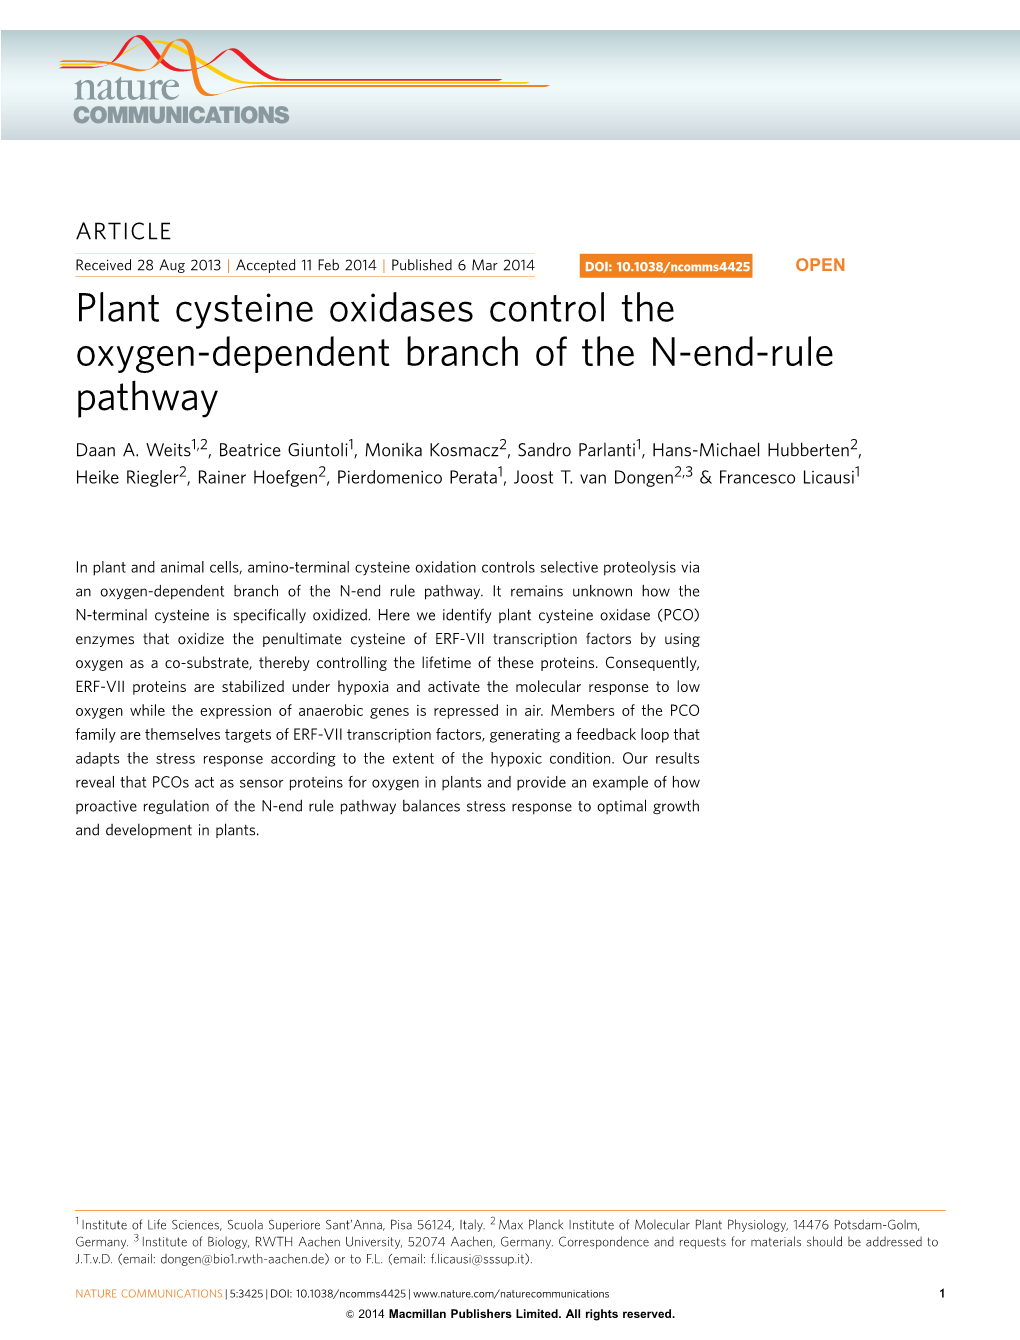 Plant Cysteine Oxidases Control the Oxygen-Dependent Branch of the N-End-Rule Pathway